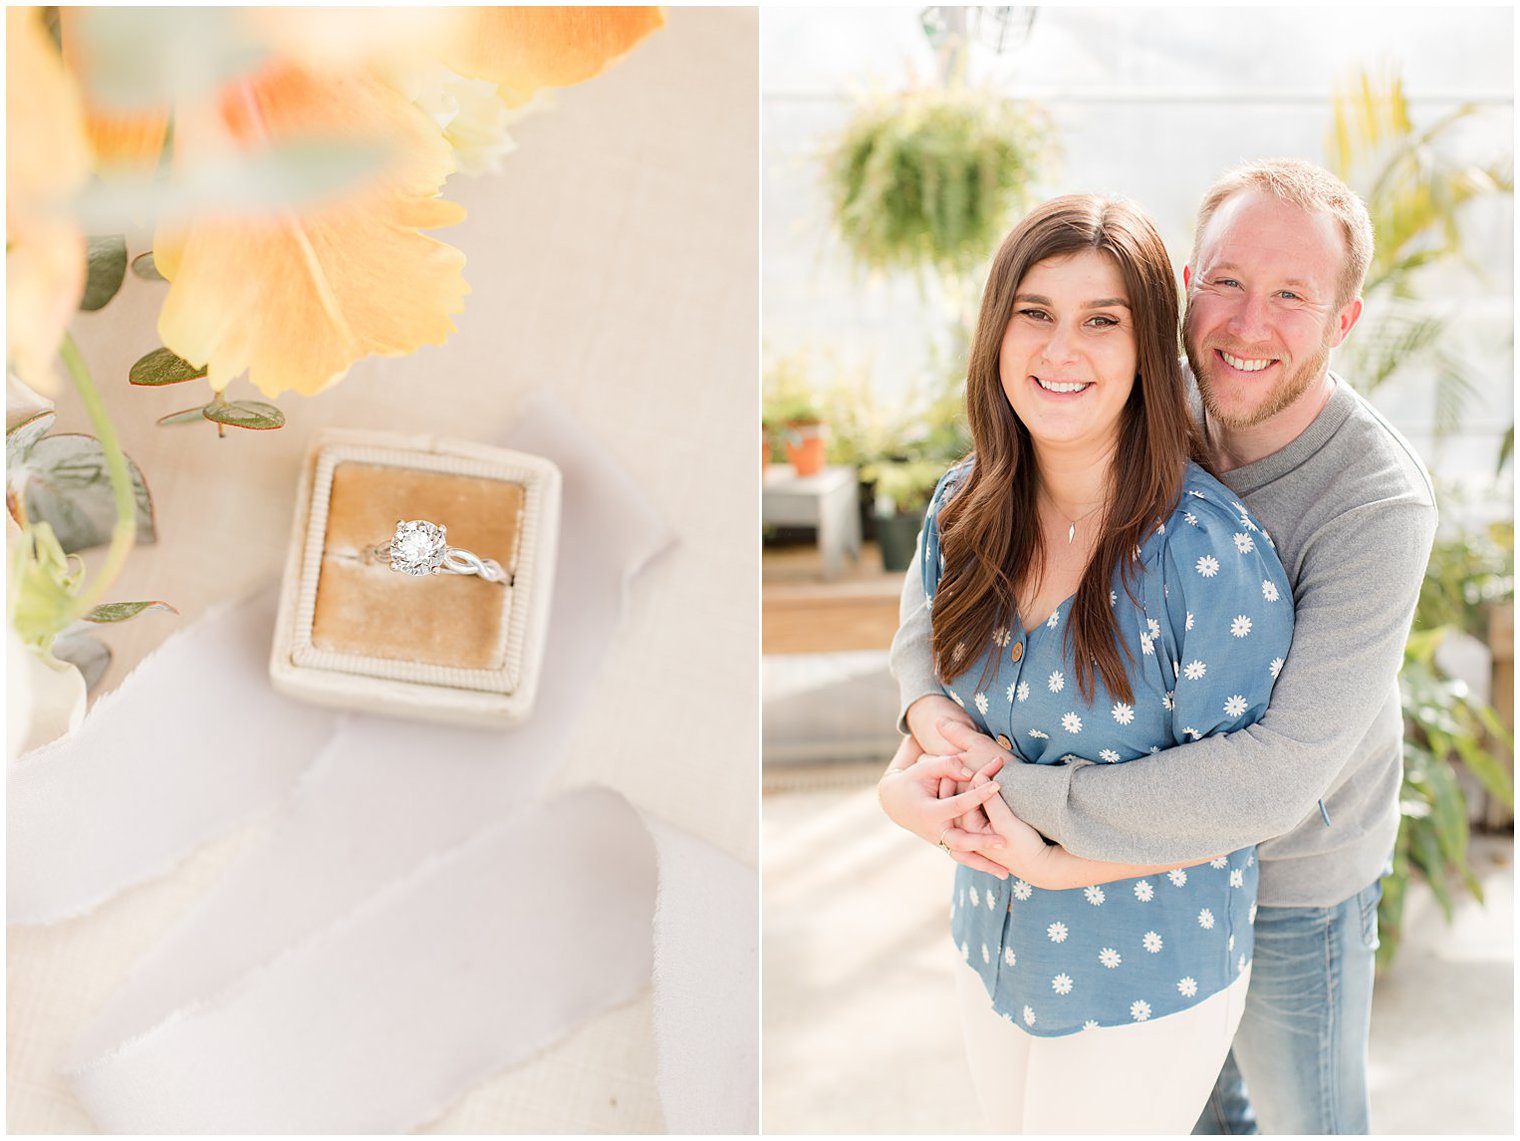 NJ engagement session with bride's ring in pale brown box